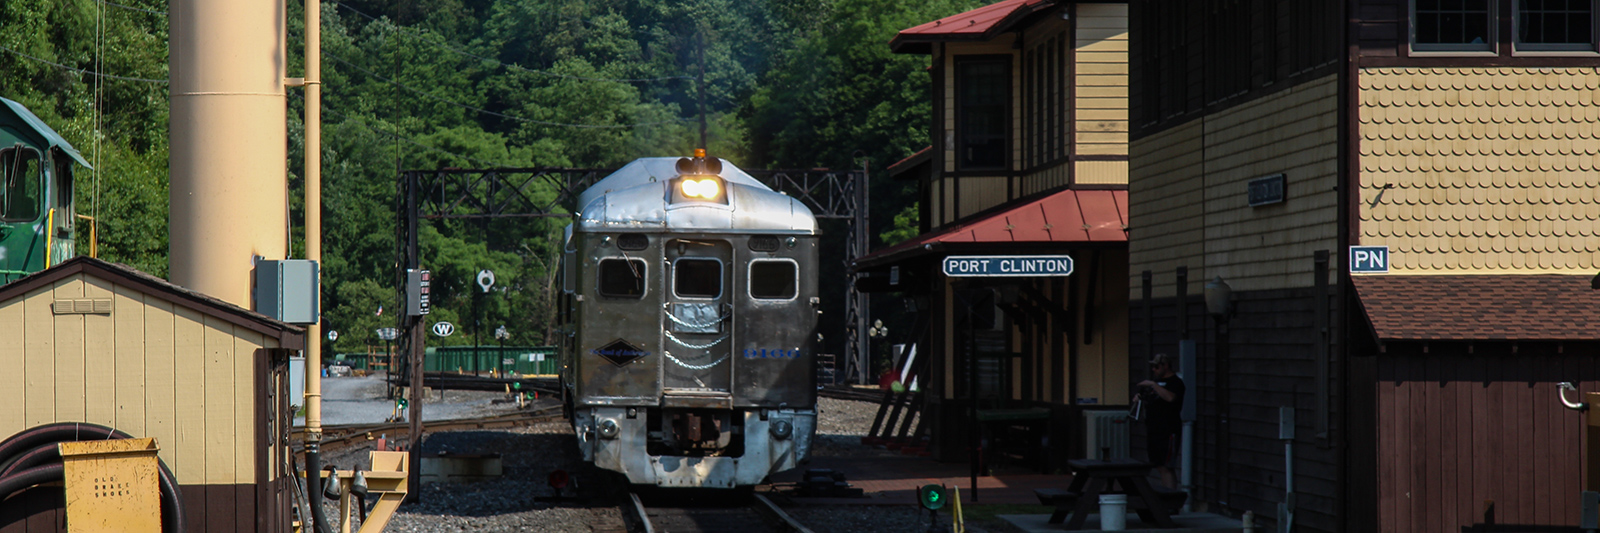 The RDC excursion special outside of the Reading Blue Mountain & Northern Railroad's corporate headquarters, a refurbished train station in Port Clinton, Pennsylvania, USA, 2015.